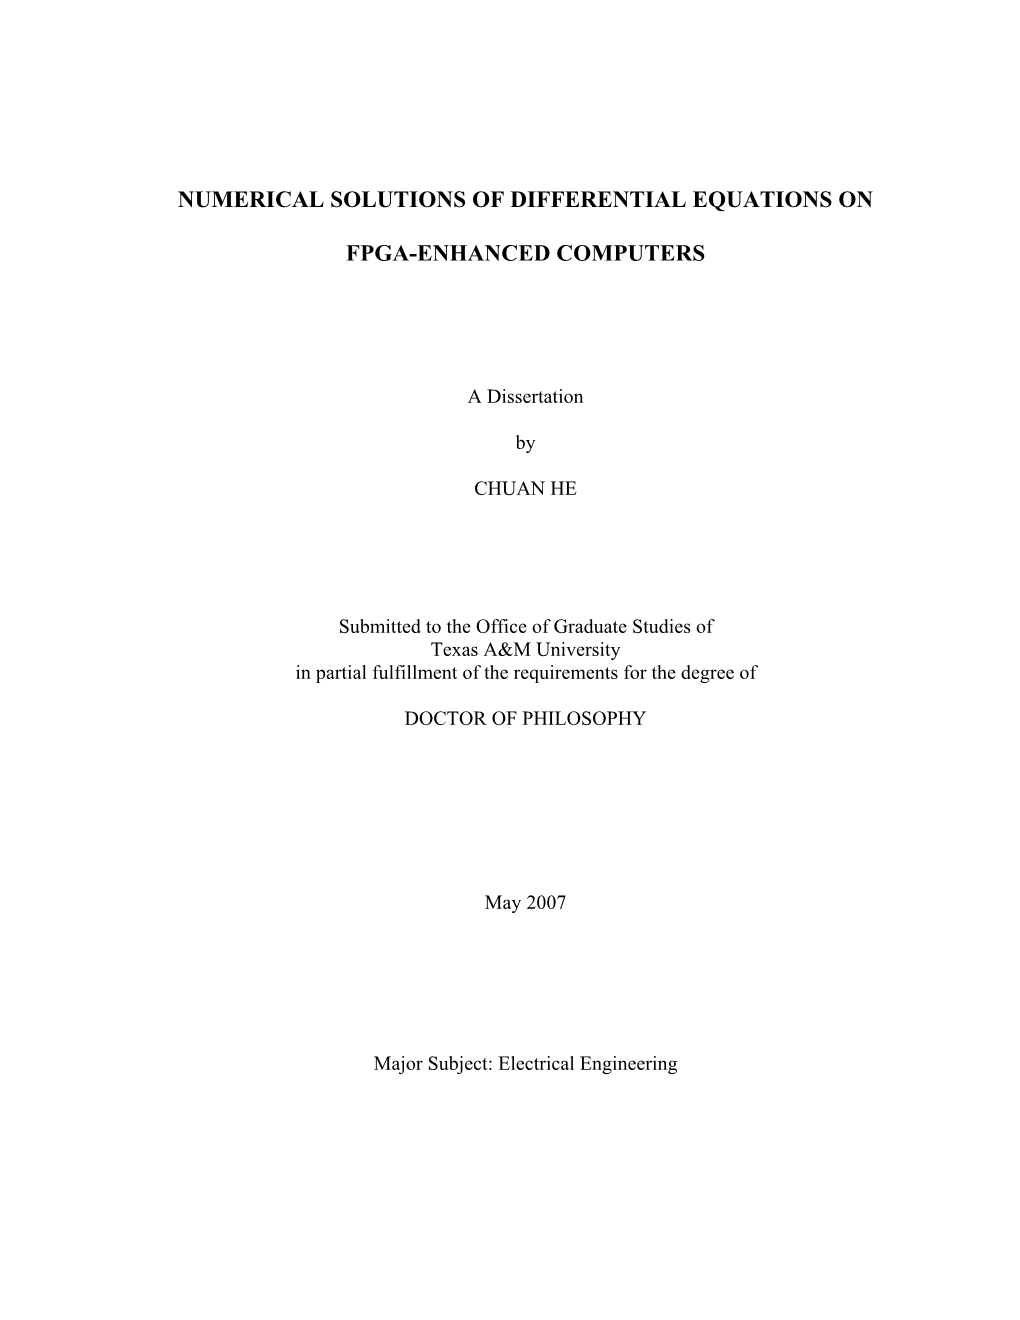 Numerical Solutions of Differential Equations on Fpga-Enhanced Computers